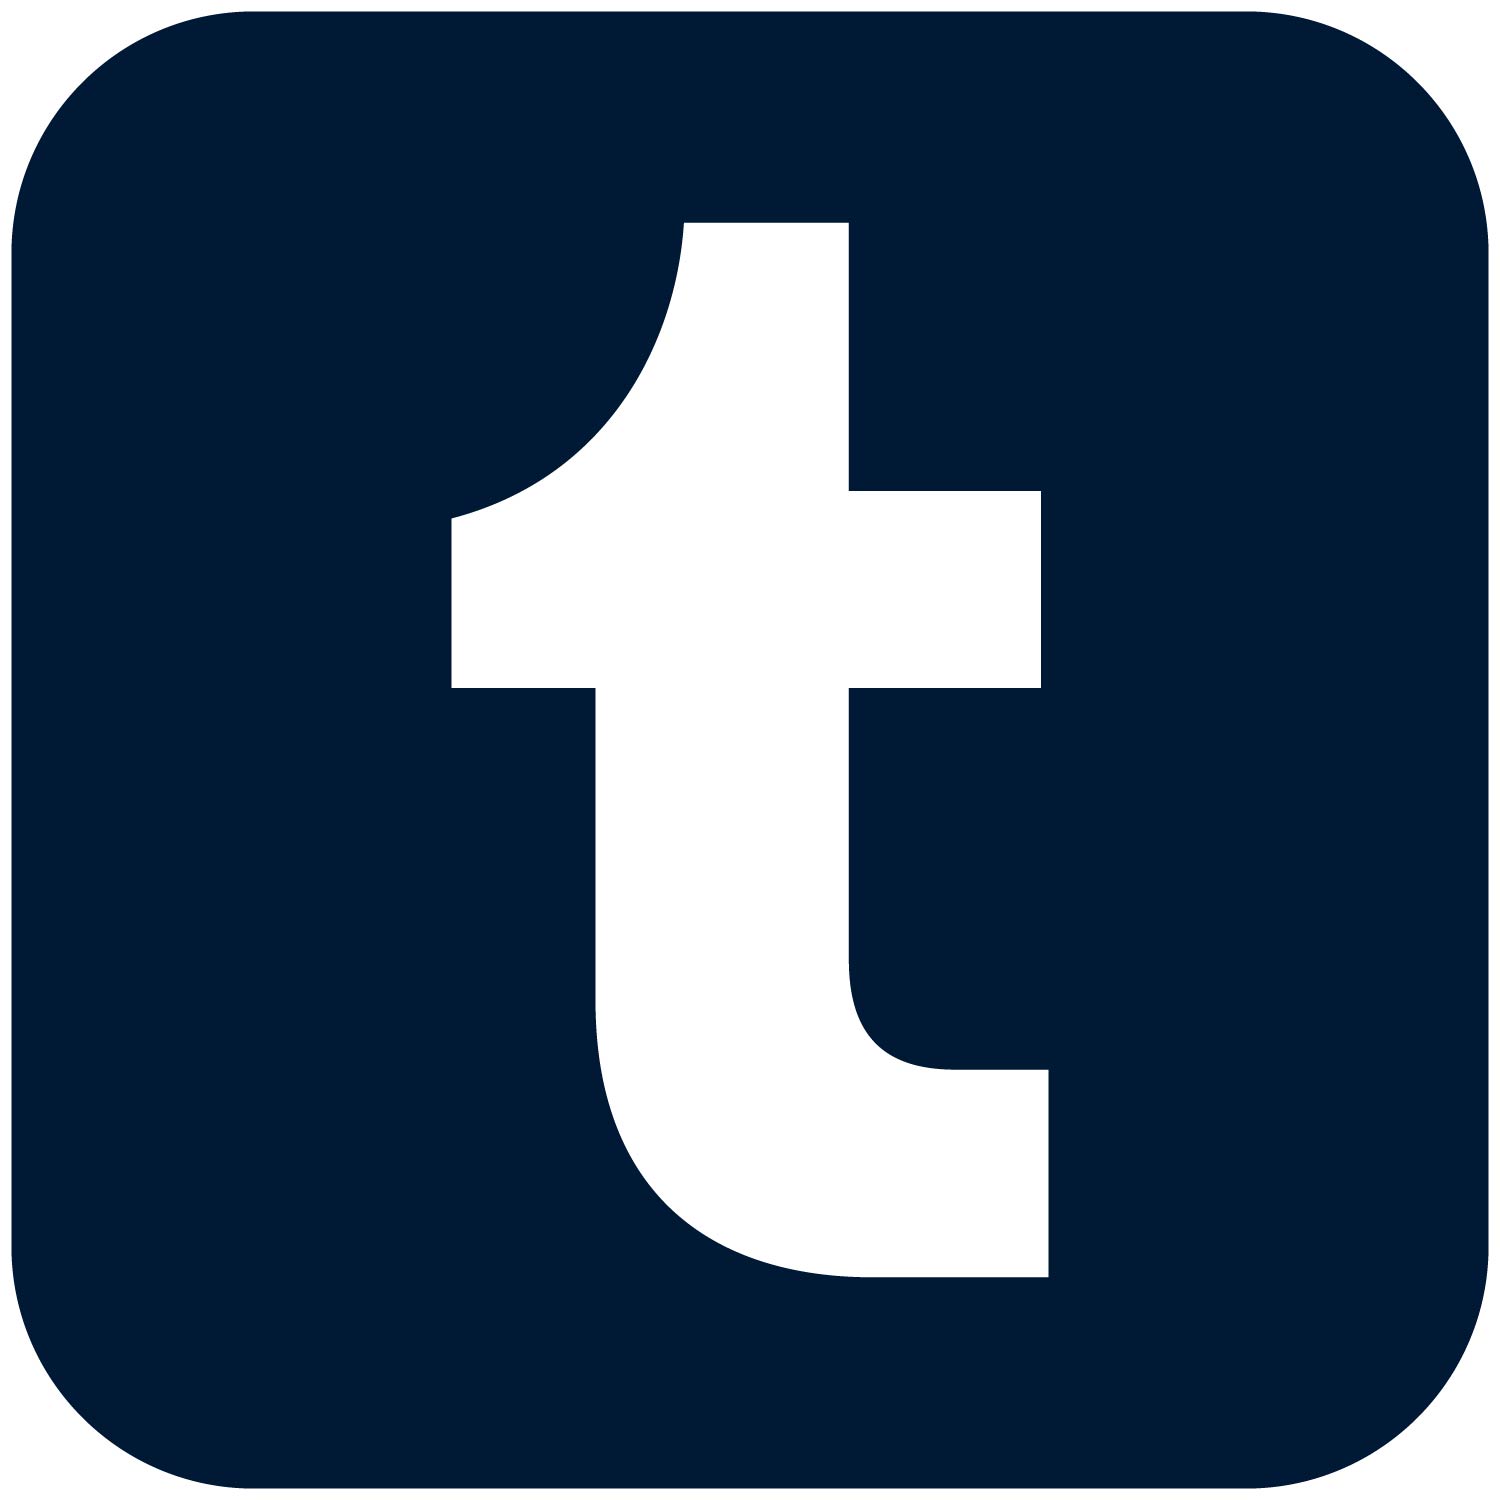 Tumblr Rounded Square Icon